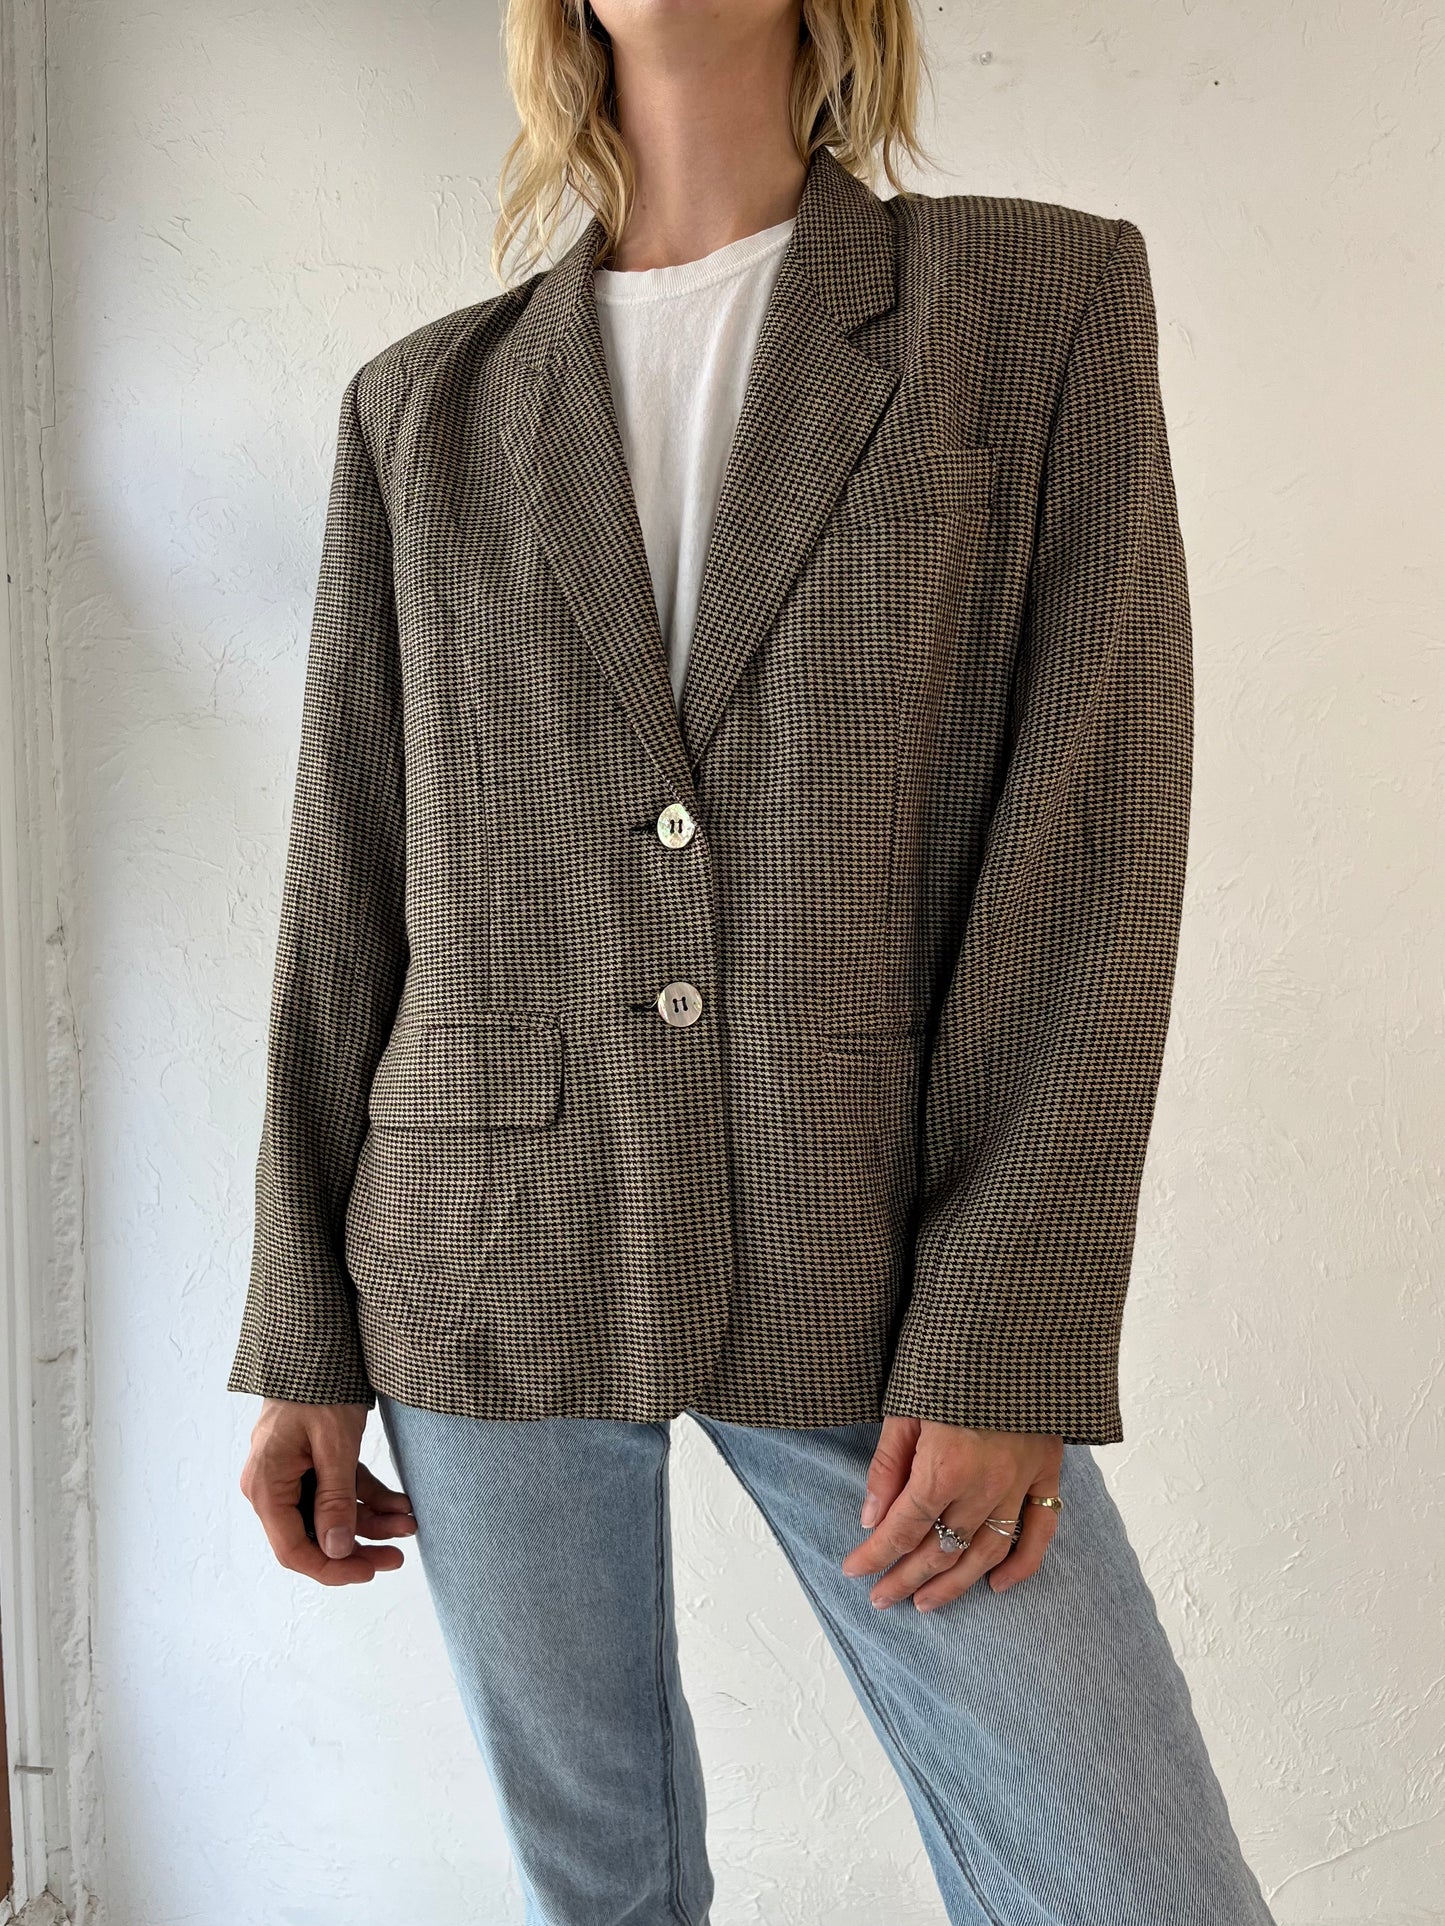 80s 'ABS' Houndstooth Rayon Blazer Jacket / Large